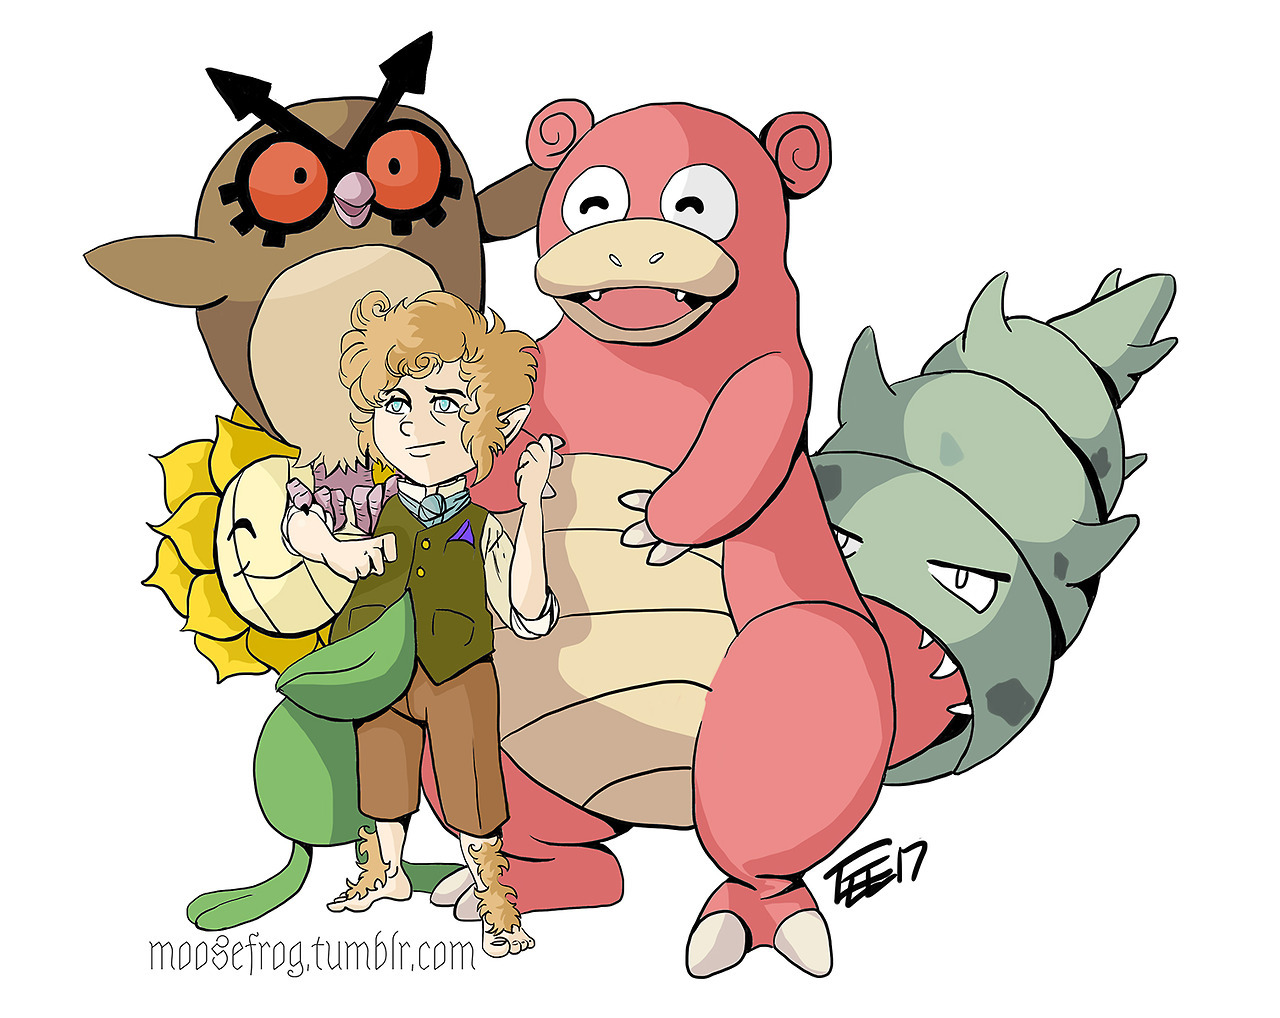 Train them with love. The lurverly @tea-blitz requested another Hobbit/Pokémon crossover with hobbits as last time I drew Bilbo with hobbits, it was him chasing off a troublesome bulbasaur and she felt hobbits and Pokémon would get on! :D I wanted to...